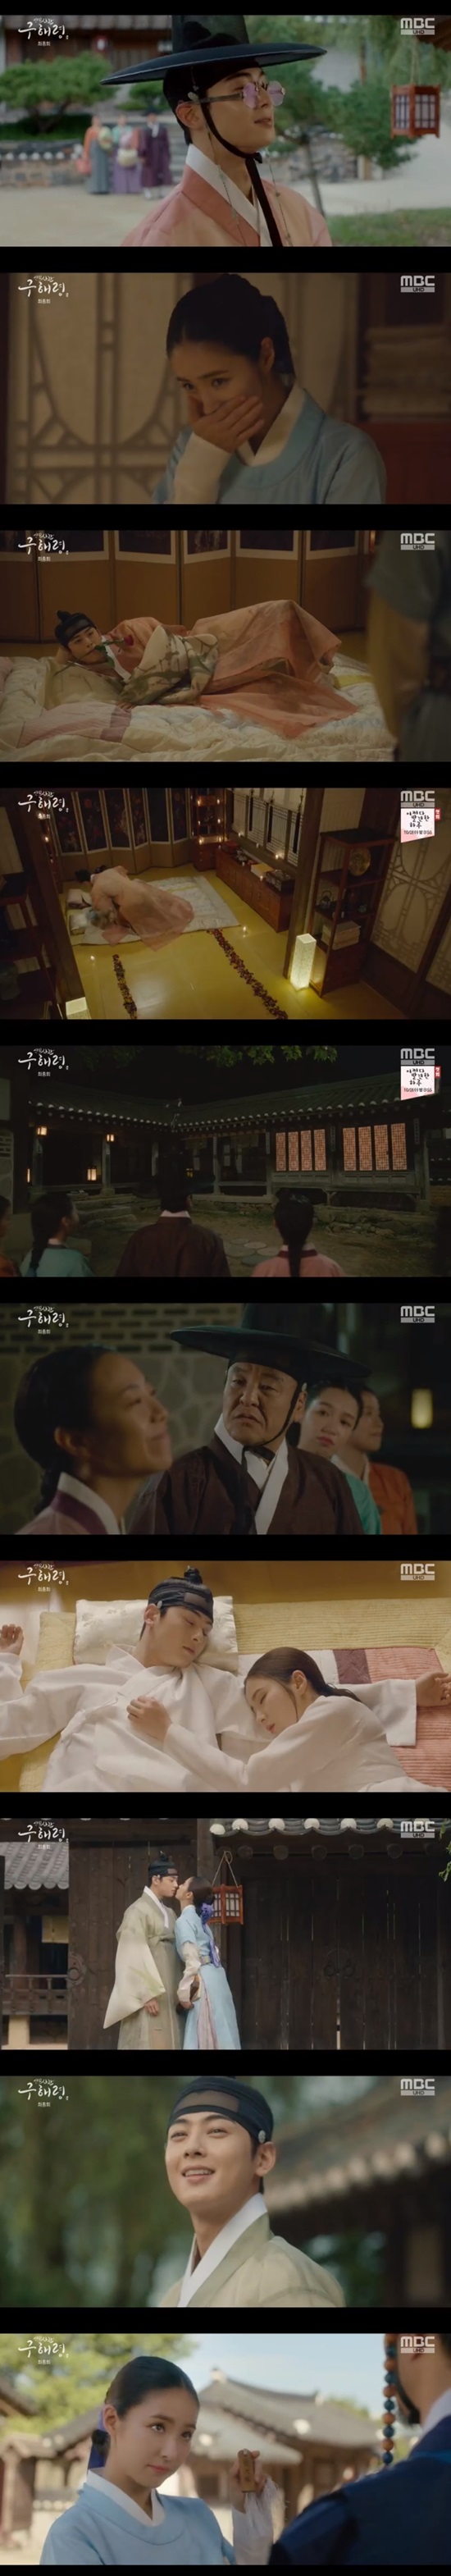 Shin Se-kyung Cha Eun-woo was hit by a special Happy Endings as a non-married love, not a marriage.Rookie Historian Goo Hae-ryung (the last episode/playplay by Kim Ho-soo/director Kang Il-soo Han Hyun-hee) was featured in the MBC drama Rookie Historian Goo Hae-ryung on September 26th. I continued to play Love.When the truth of Ban Jeong began to be revealed 20 years ago with the fact that Daewon Daegun Irim was the enemy of the lungs, Min Ikpyeong (Choi Deok-moon) planned to kill Irim and drive out Lim (Kim Yeo-jin), but Seja Lee Jin (Park Ki-woong) took the lead and turned the situation around, asking the king (Kim Min-sang) to correct the truth 20 years ago.Irim hated him, but he wondered if guilt had been the reason he hadnt killed him in the last twenty years, and he finally gave the condiment to do everything.The contrast was to take off the unfair stigma that his son Lee Kyeom (Yoon Jong-hoon) and Seo Rae-won people had been overlaid 20 years ago and try to put Irim on the throne, but Irim refused.It was Lee Jin who became king three years later.Min Woo-won (Lee Ji-hoon) revealed that Min Ik-pyeong had just finished his fathers three-year prize for Min Ik-pyeong, which he paid for his role-playing 20 years ago.The contrast was still angry with Irim, and Irim returned from a long trip and went straight to Rookie Historian Goo Hae-ryung.Irim sprayed flowers on the bed and waited for Rookie Historian Goo Hae-ryungs return home.Rookie Historian Goo Hae-ryung says, I think I will die of fatigue.I thought I could see it tomorrow. I was going to miss it during the moonlight that left Hanyang. Tomorrow?Rookie Historian Goo Hae-ryung asked me about the trip that Irim had come to dream to appease Irim, and Irim said that he had seen Gangdon (the dolphin), saying, If you have any more questions, buy my book and see it yourself.You should buy it, too. The last book of the cruise was sold only 12 books, he lamented.Irim, who turned from a great writer to a cruise diary writer, was not able to escape the struggle.Ill go, Rookie Historian Goo Hae-ryung said, Lock the door, please, please, please, please, and the two spent the night together.Her Sambo (Sungjiru) looked at the two peoples room and said, Why do not you marry while living away every day?I dont understand, said Rookie Historian Goo Hae-ryung, a somatoma of Sulgeum (beautiful mother), when you want to do it.I dont think someone like you knows the hearts of our younger generation, he lamented.Yoo Gyeong-sang